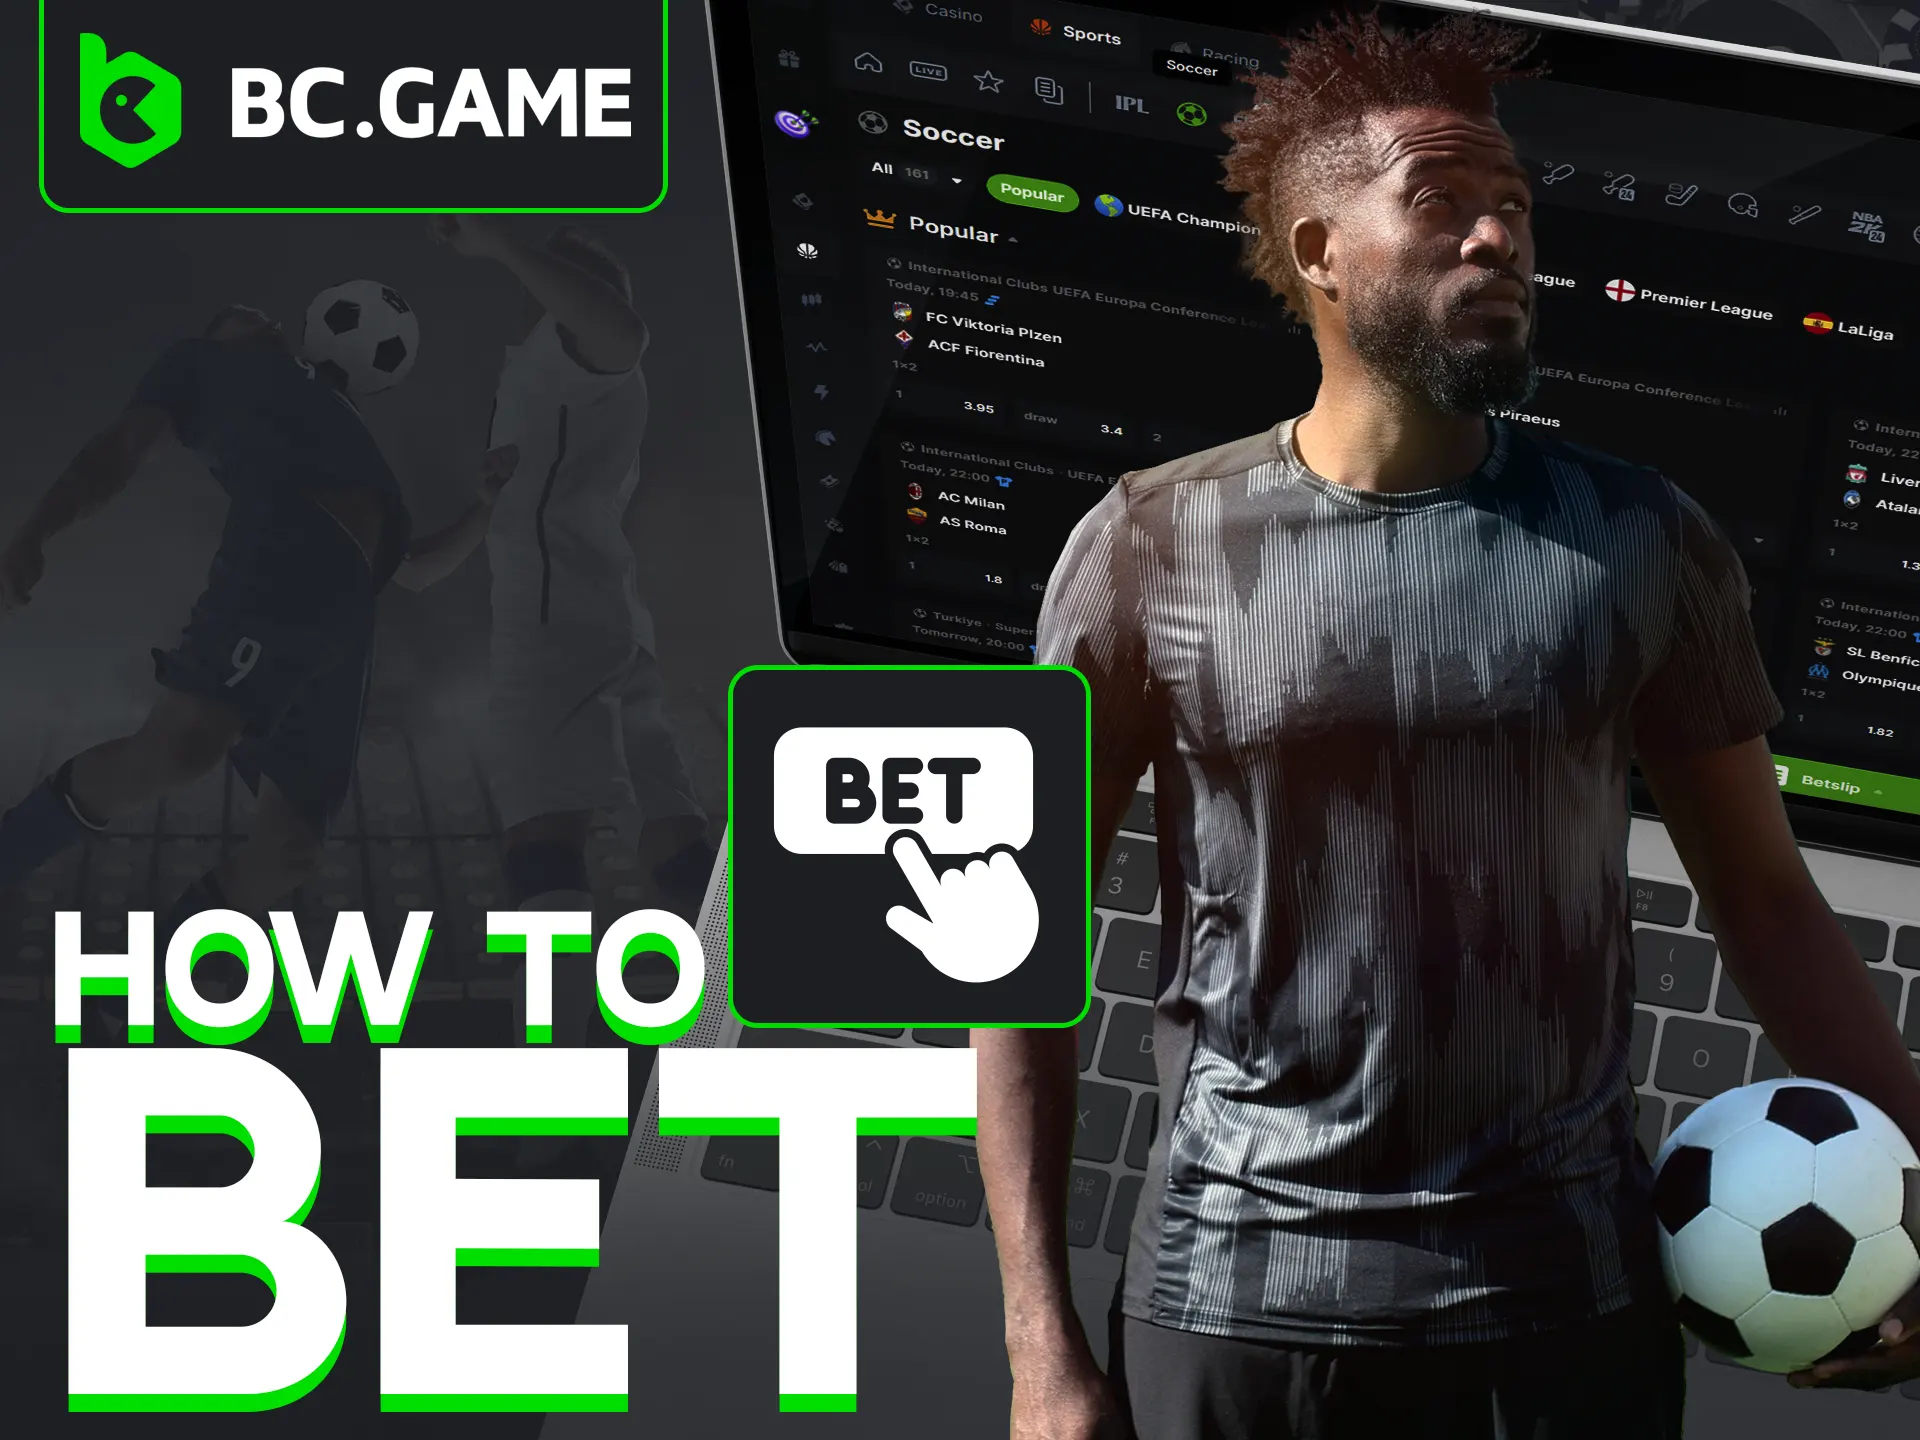 Start soccer betting at BC Game with easy registration and deposit.